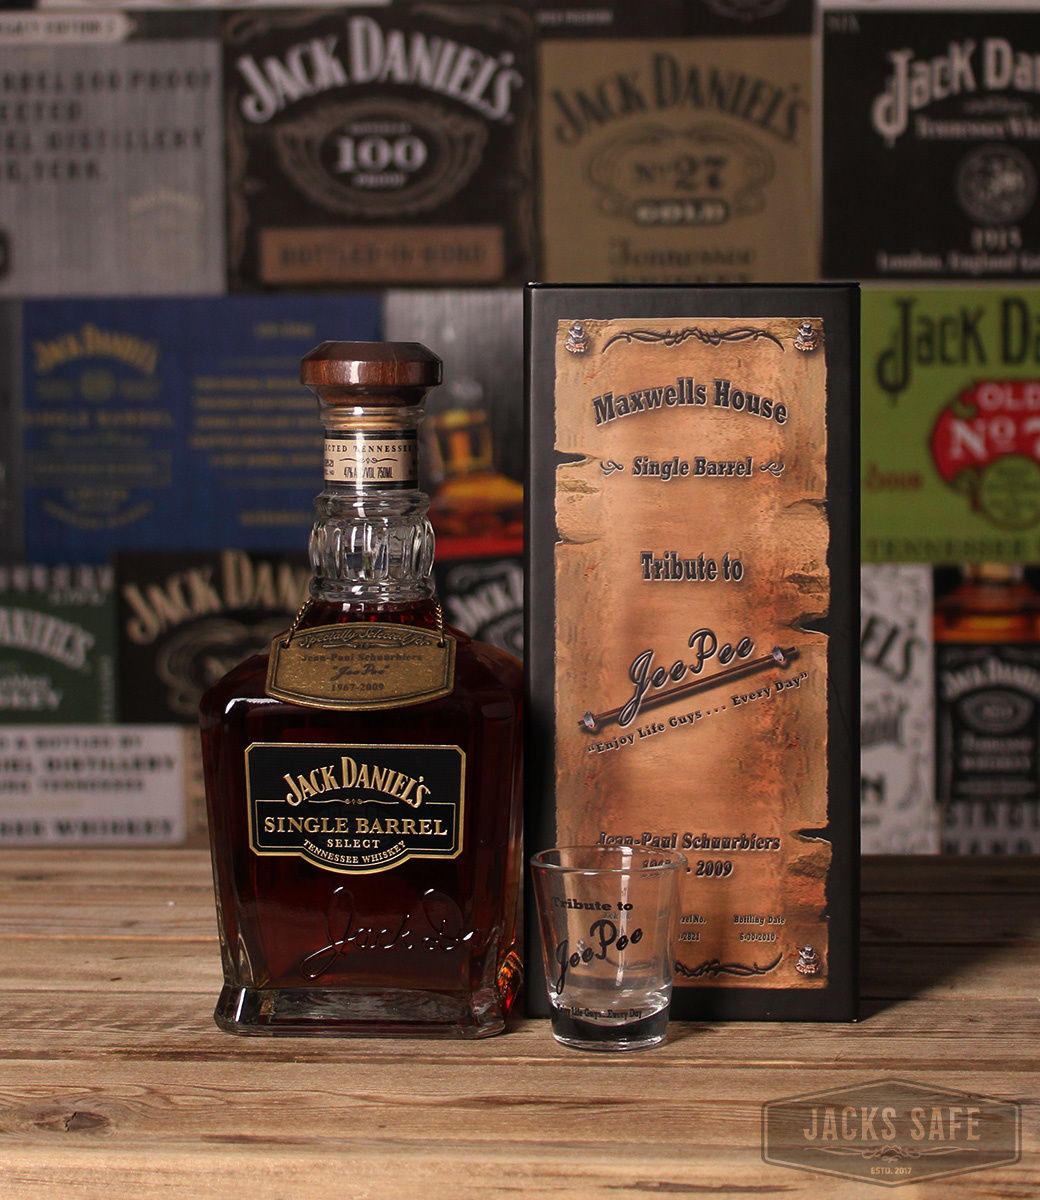 JACK DANIEL'S - Single Barrel - Personal Collection - JeePee - US - '10